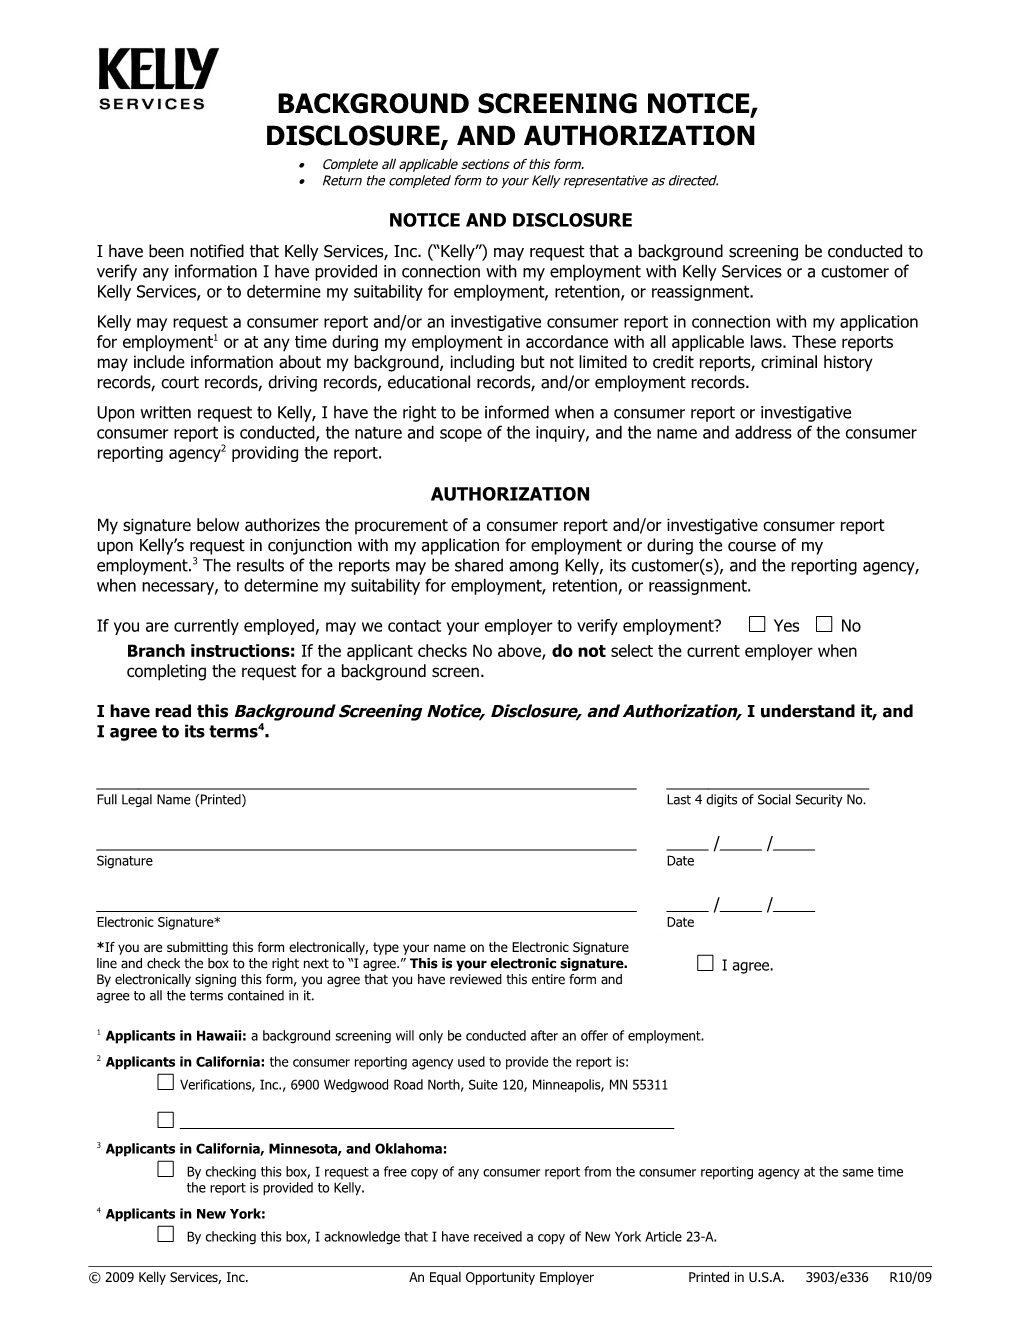 Background Screening Notice Disclosure, and Authorization (E336)